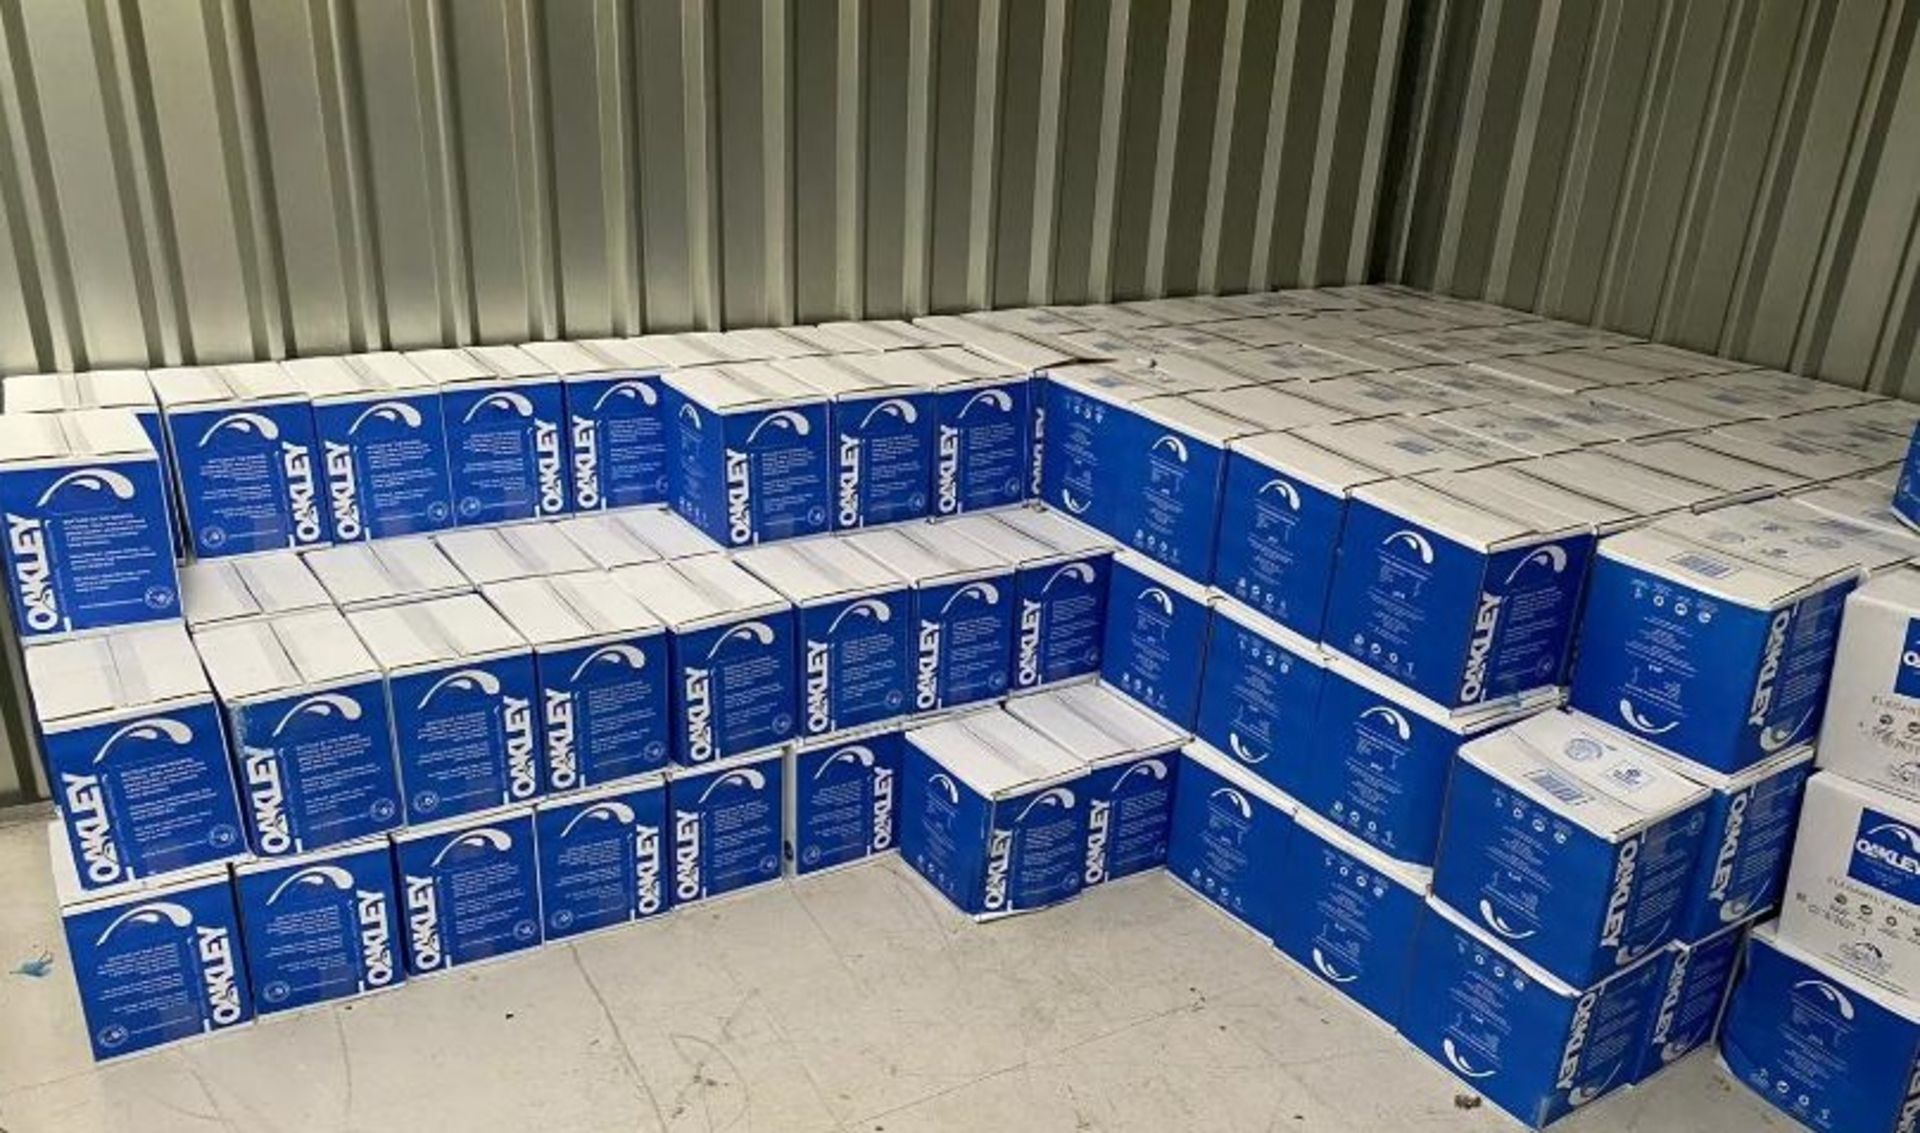 50 x Boxes of Oakley Artisan Water - Best Before Dec 2021 - 12 Packs in Each Box - Includes 600 - Image 2 of 8